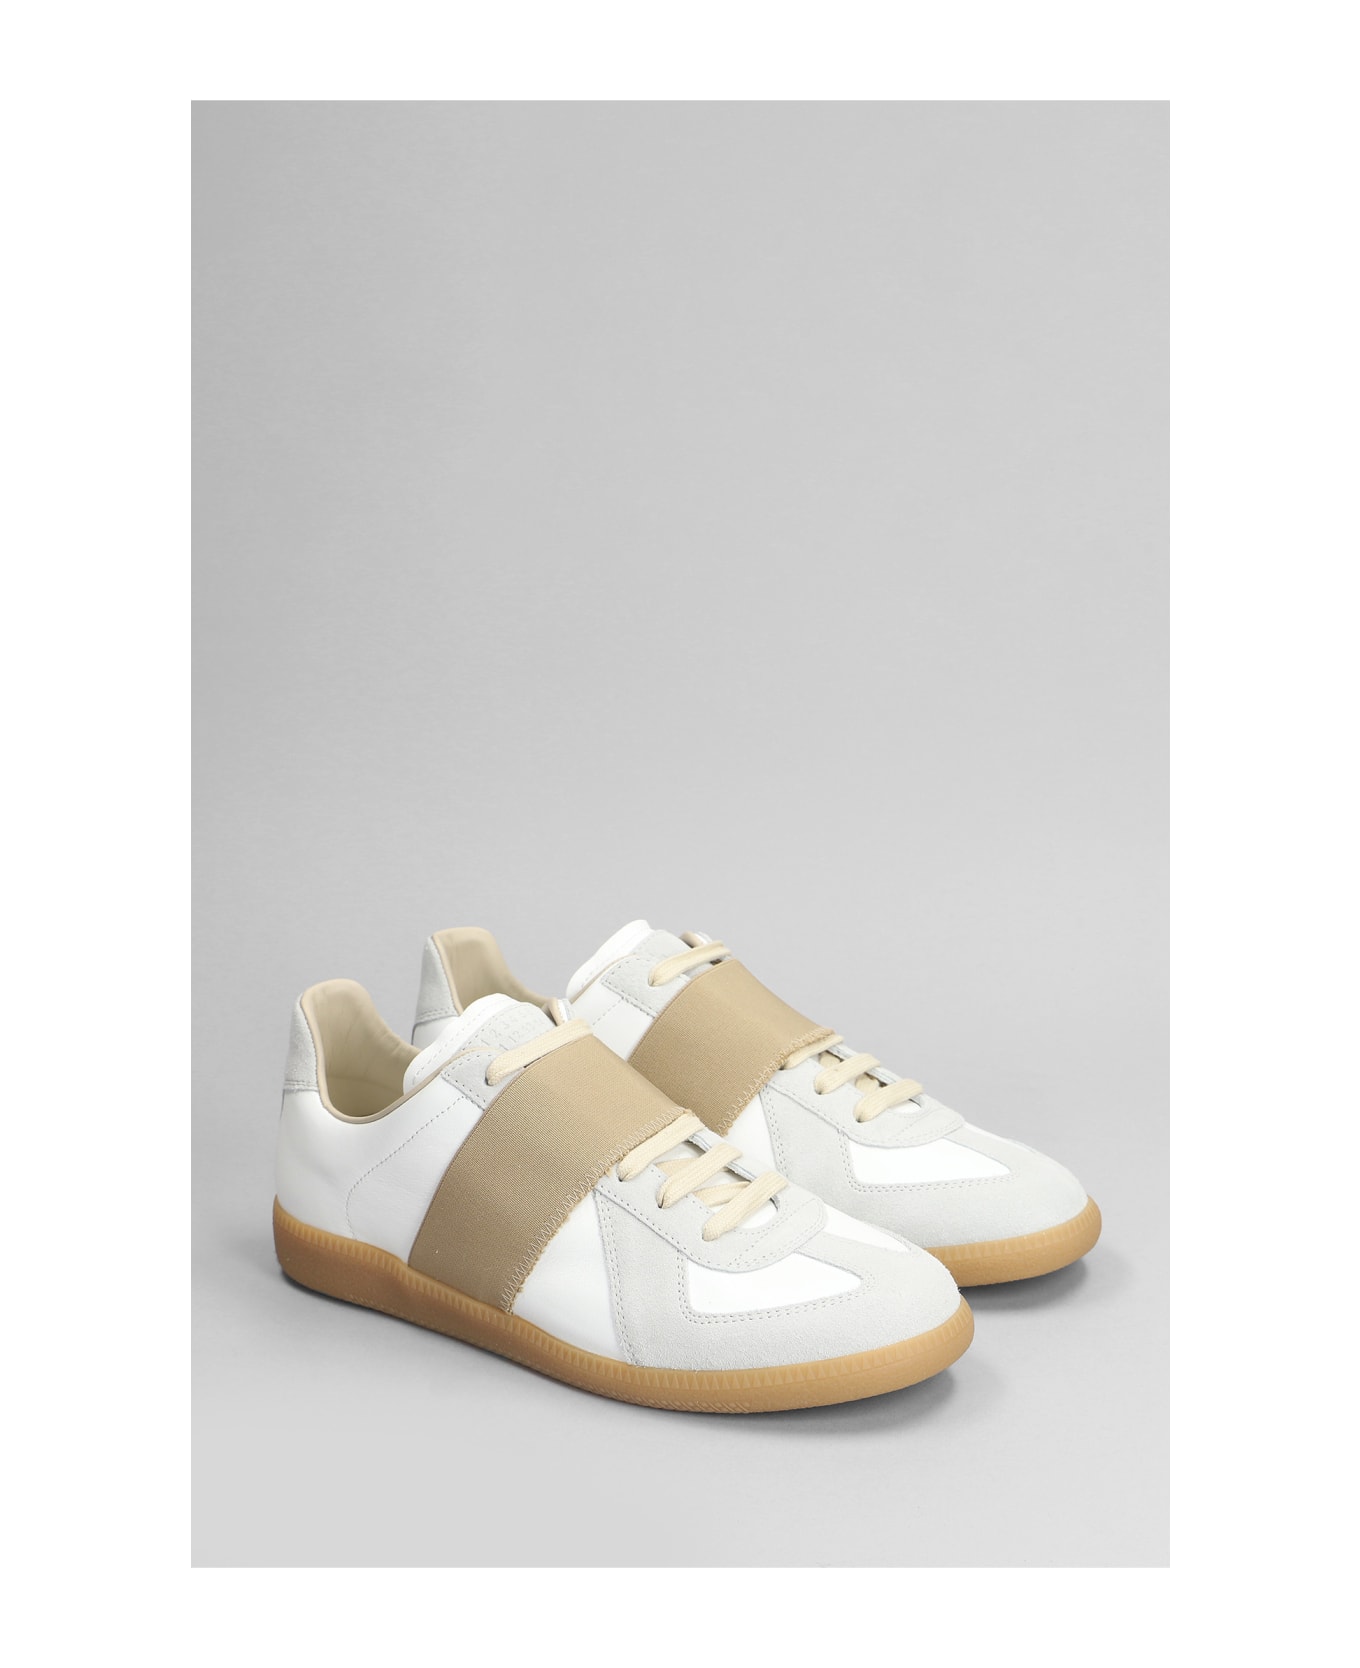 Maison Margiela Replica Sneakers In White Suede And Leather - white